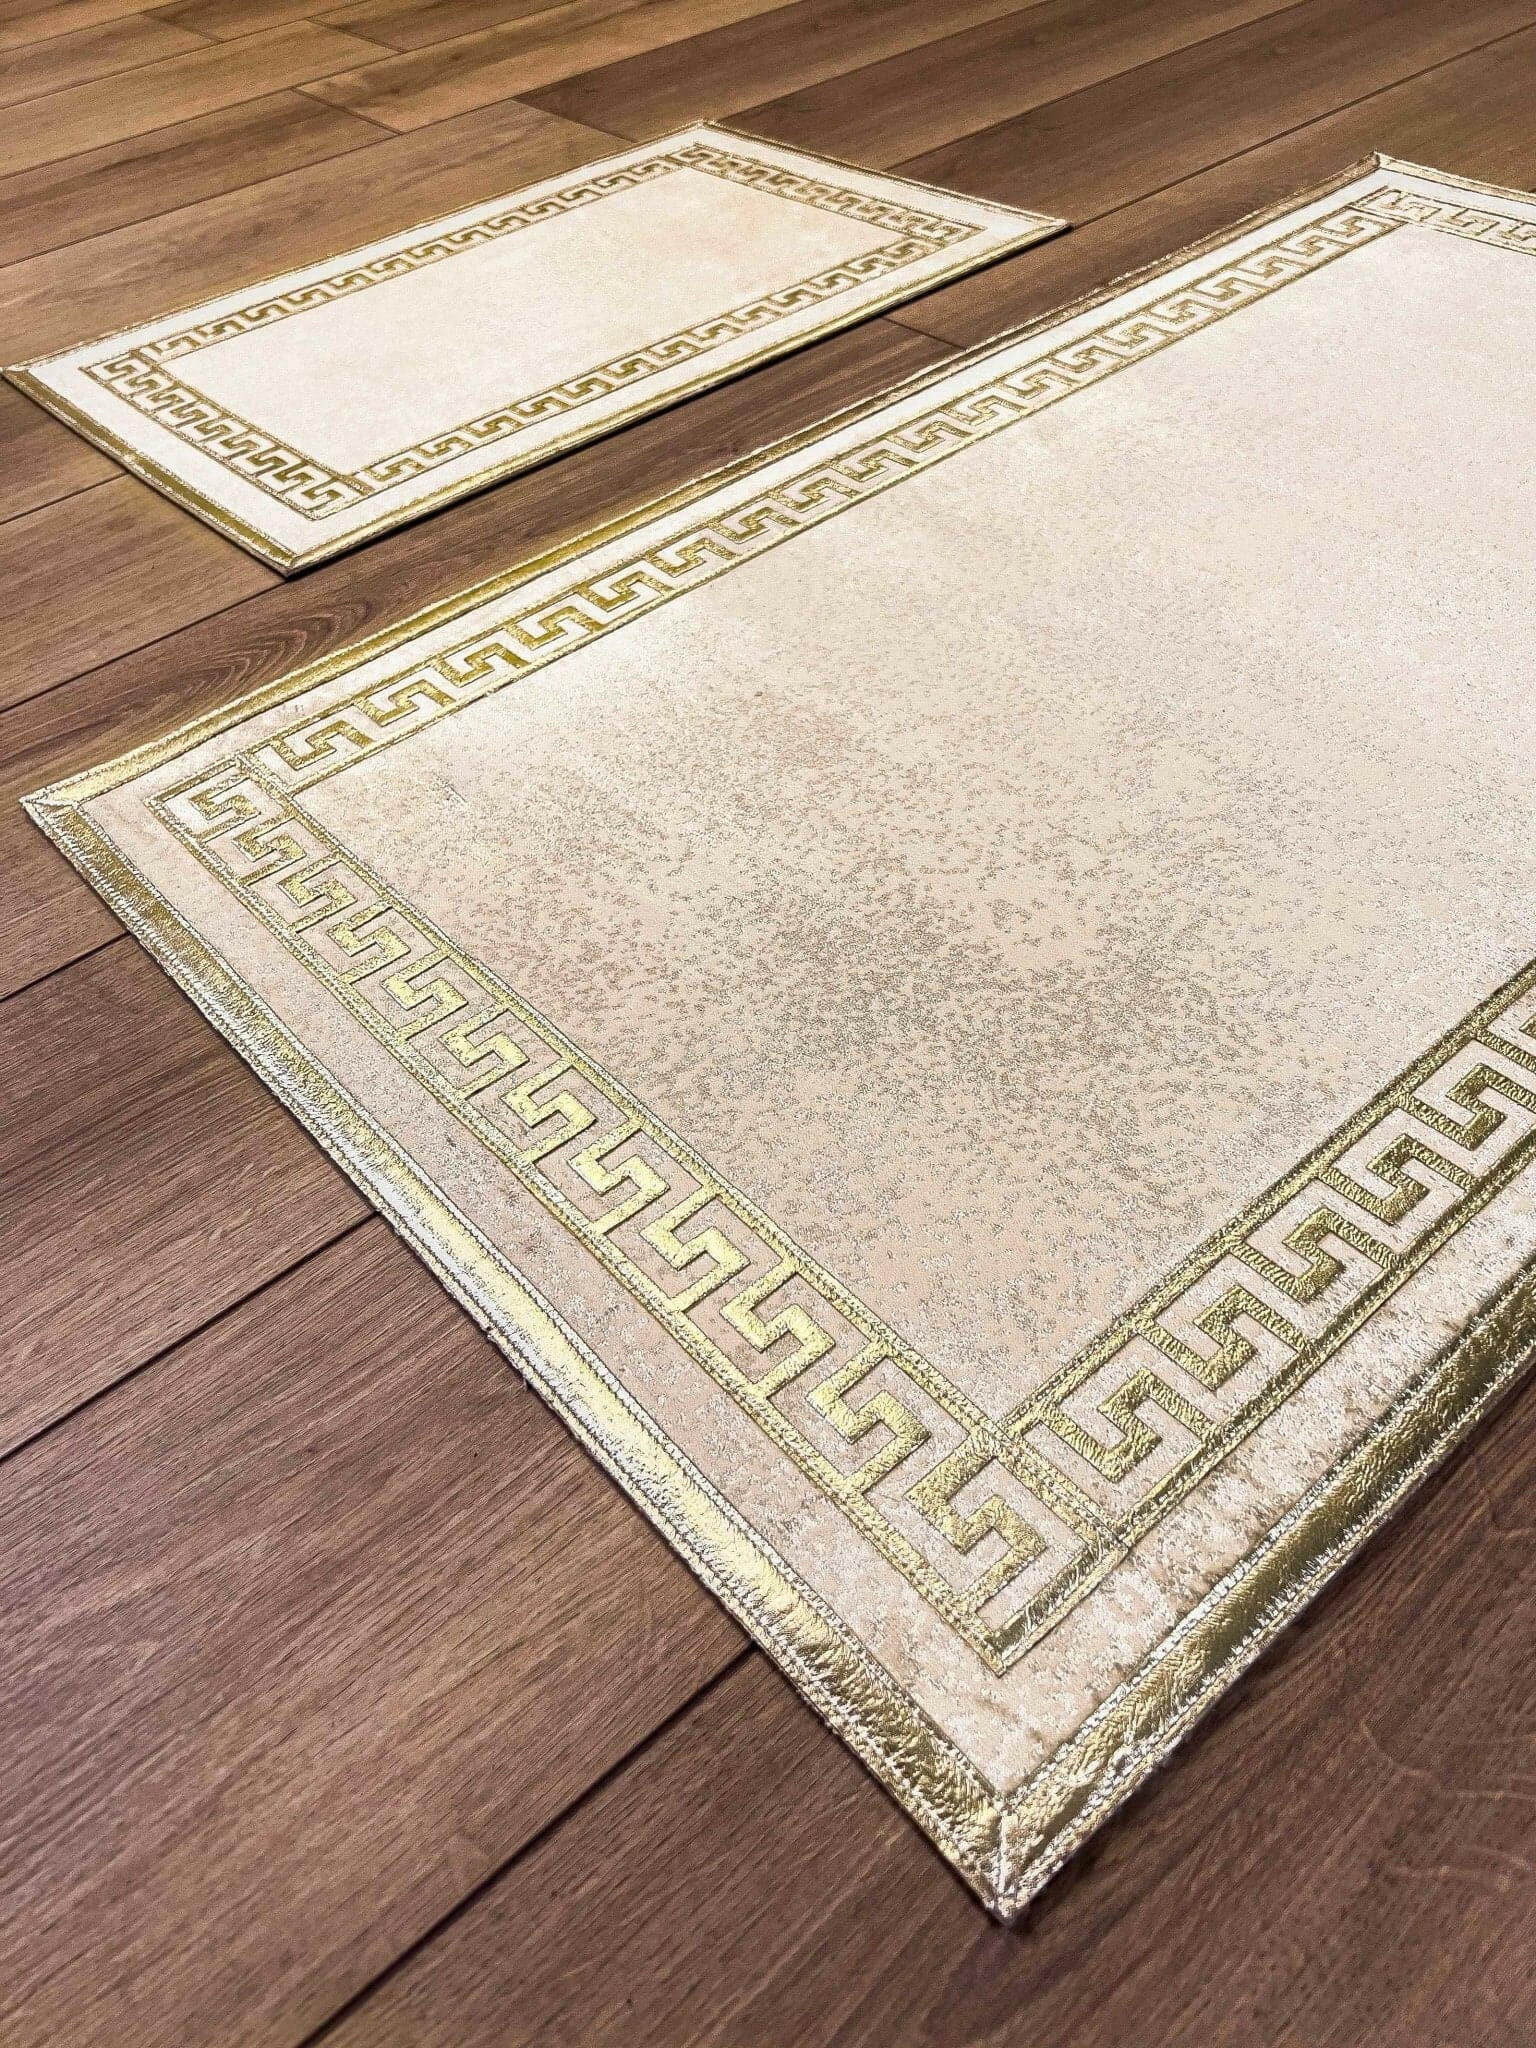 Anka Exclusive Cream & Gold Color Rug - Creative Home Designs Rugs, Versace Style Turkish Carpet, Greek Key Mat,RUG-ANKAE-CG-4060,RUG-ANKAE-CG-60100,RUG-ANKAE-CG-70120,RUG-ANKAE-CG-85137,RUG-ANKAE-CG-121182